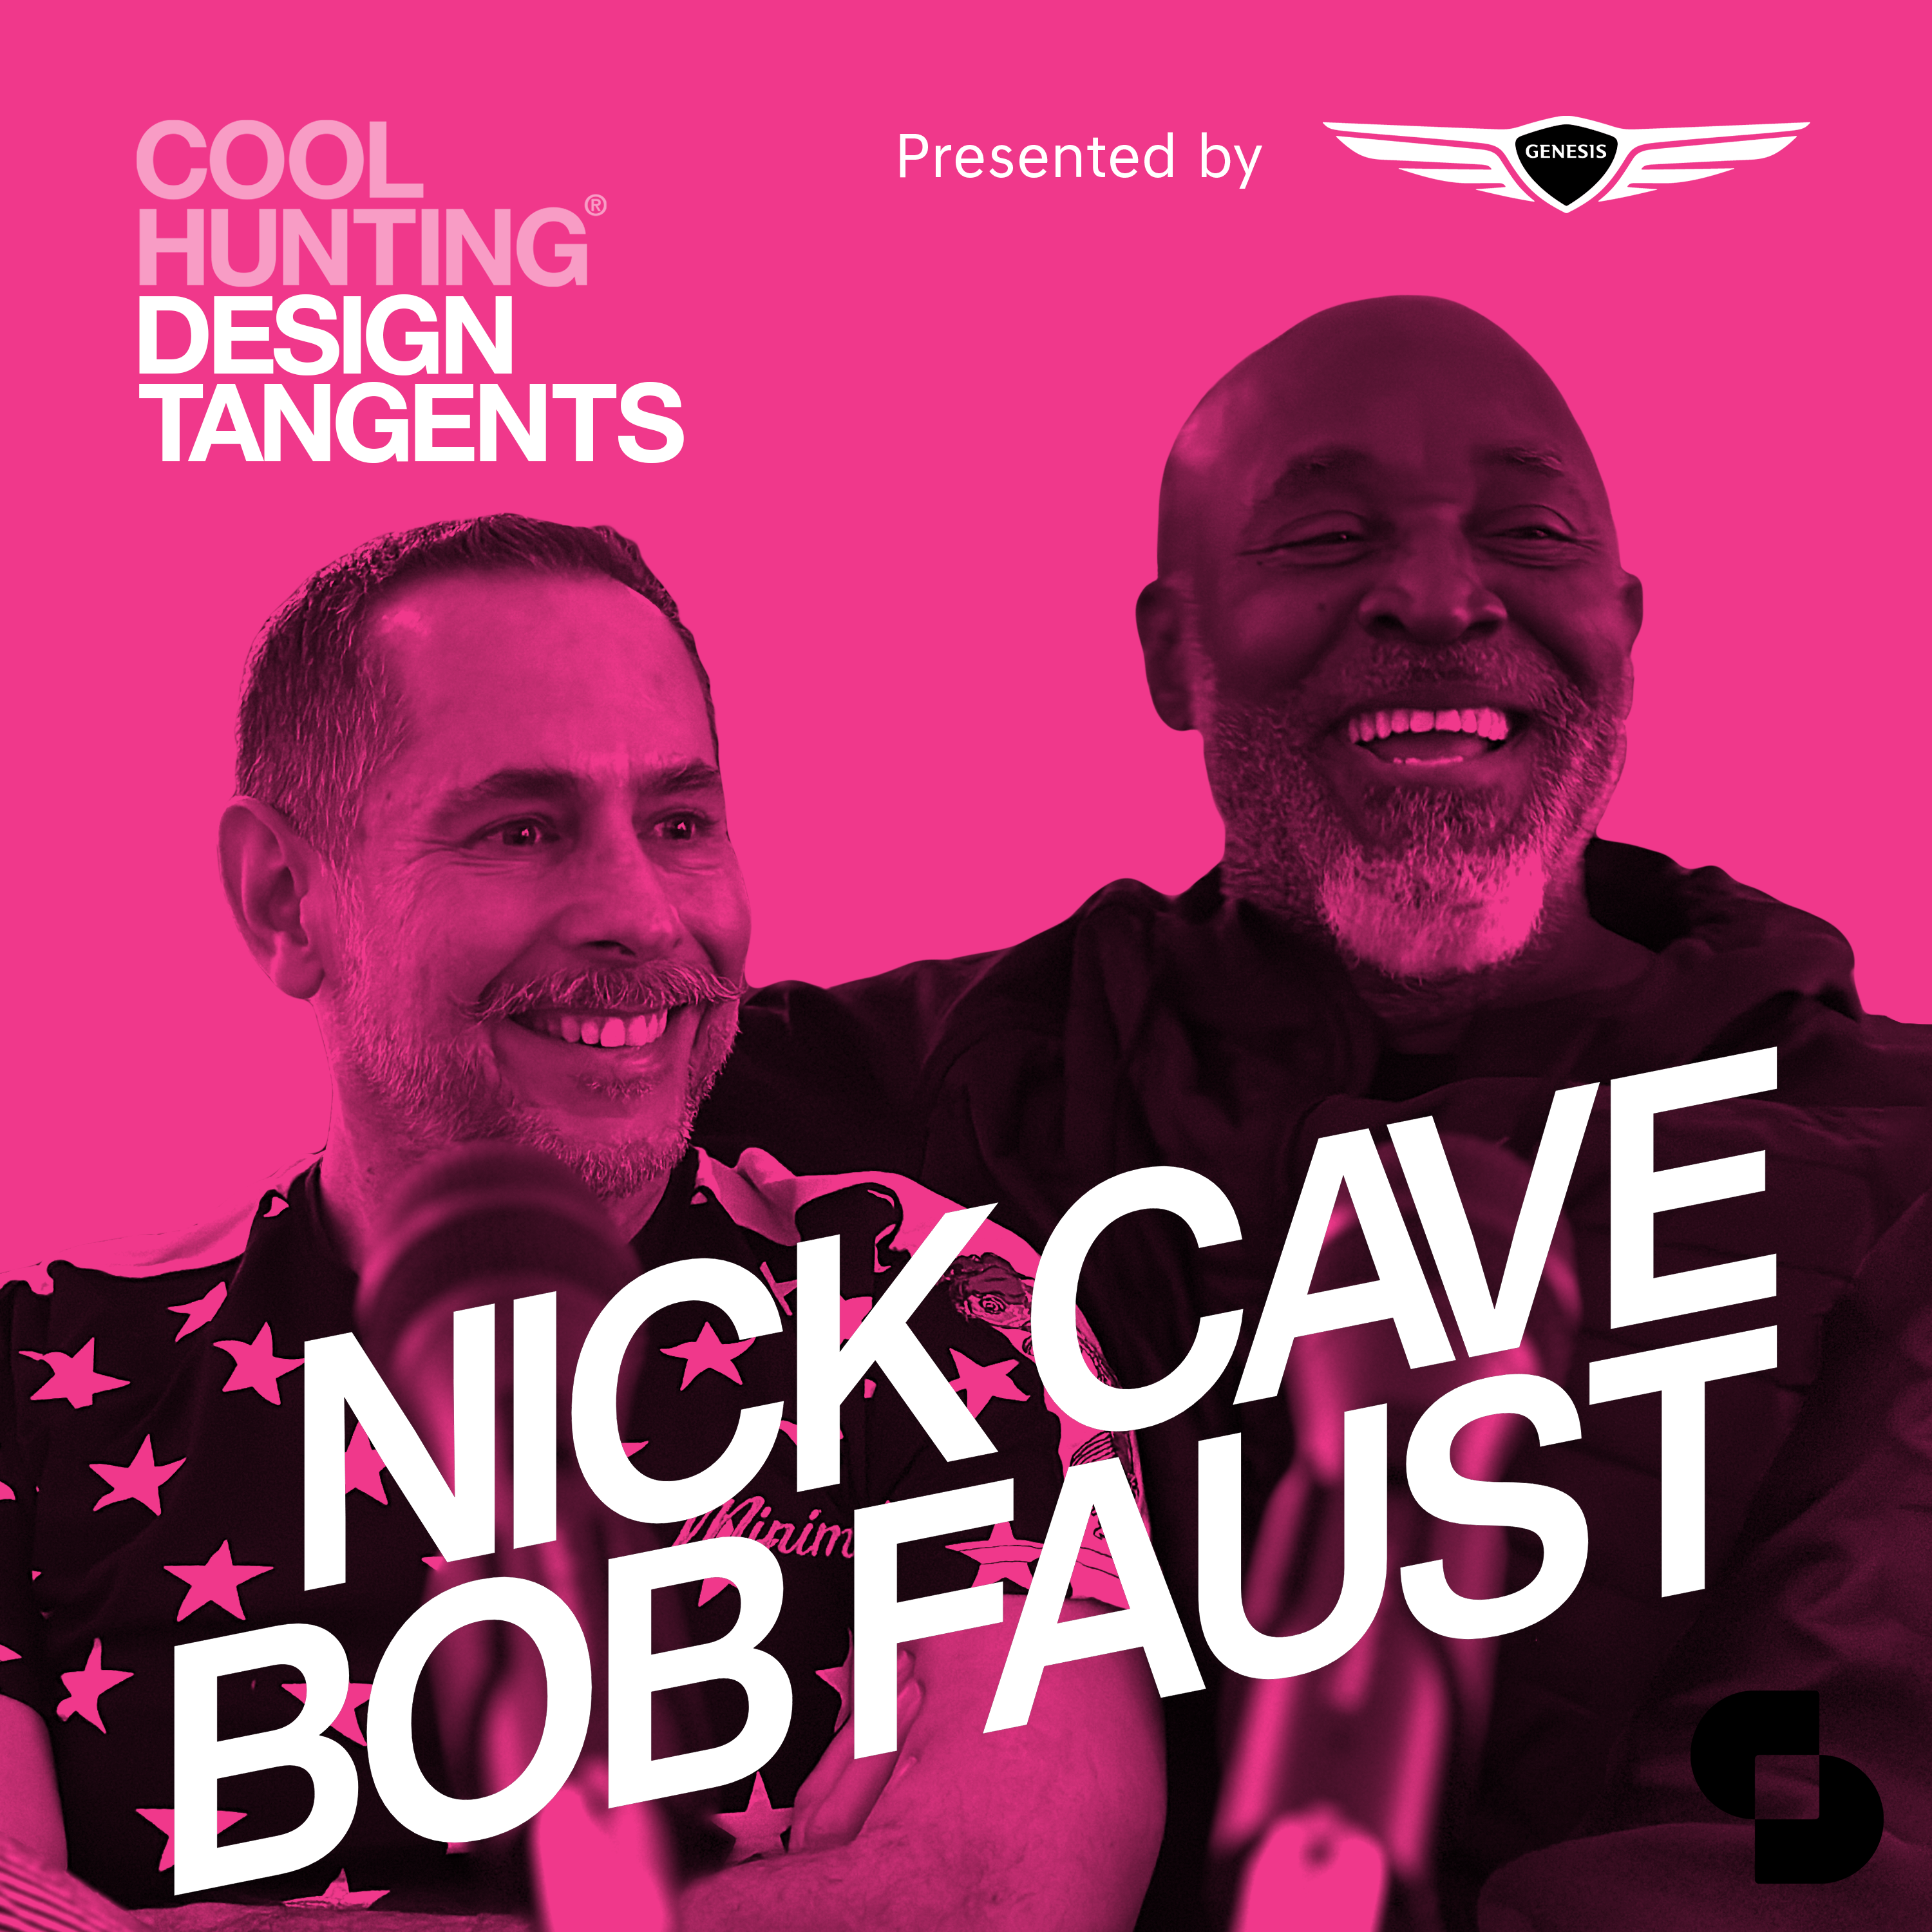 Design Tangents podcast artwork with pictures of Nick Cave and Bob Faust on the cover